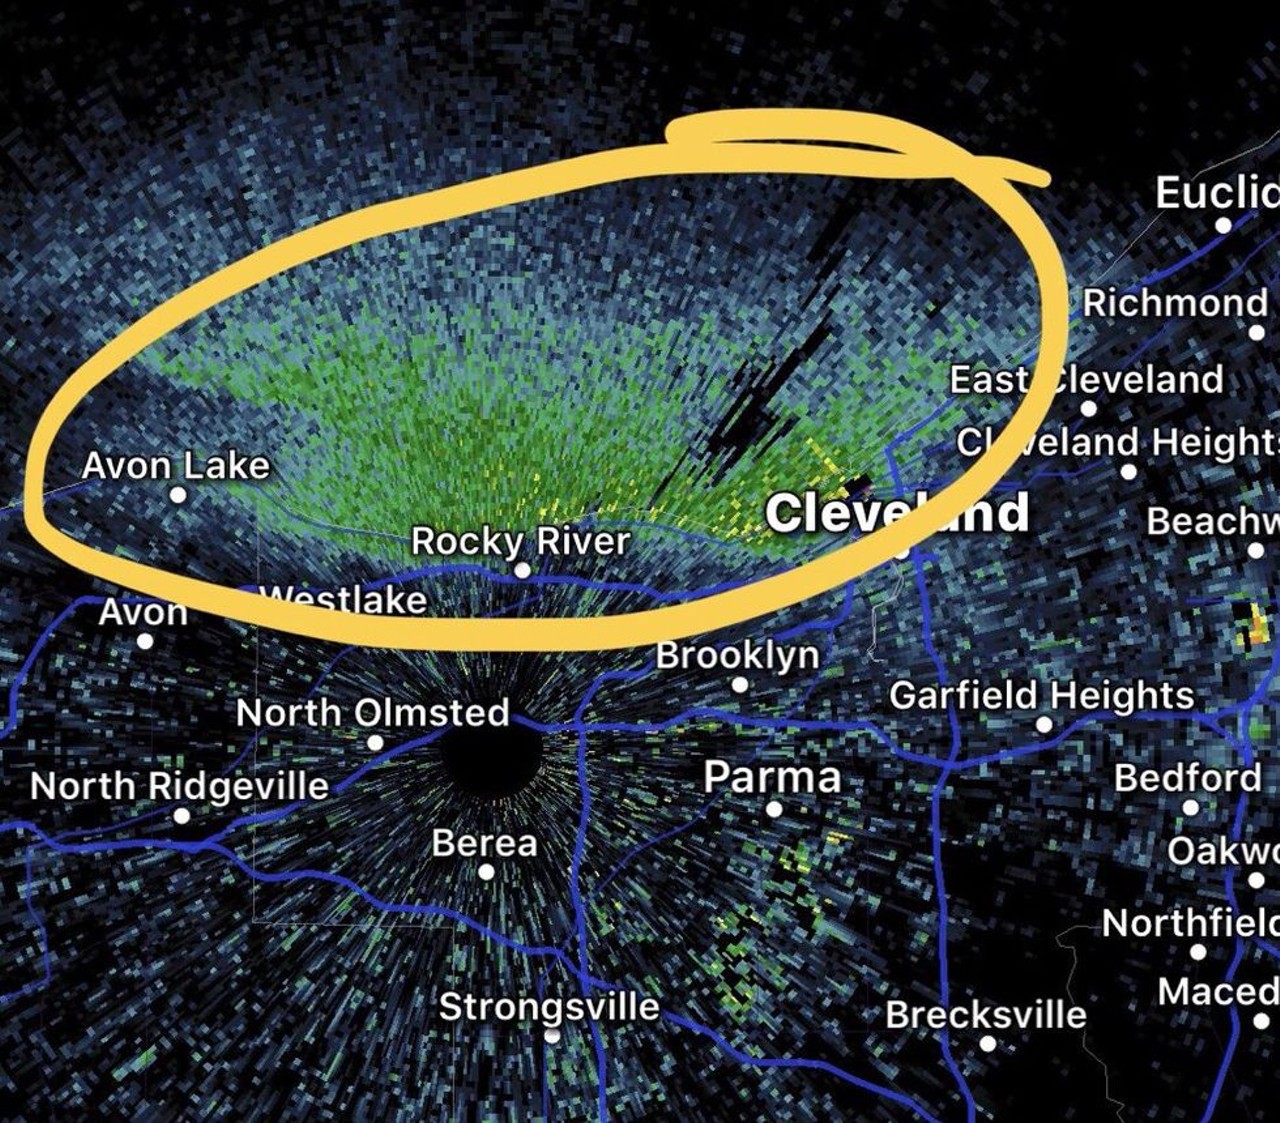  &#147;Hordes of Midges Show up on Cleveland Doppler Radar&#148;
June 4
Those damn midges that invade the city every year are very annoying. But the fact that they actually show up on radar is just bizarre.
Photo via Scene Archives